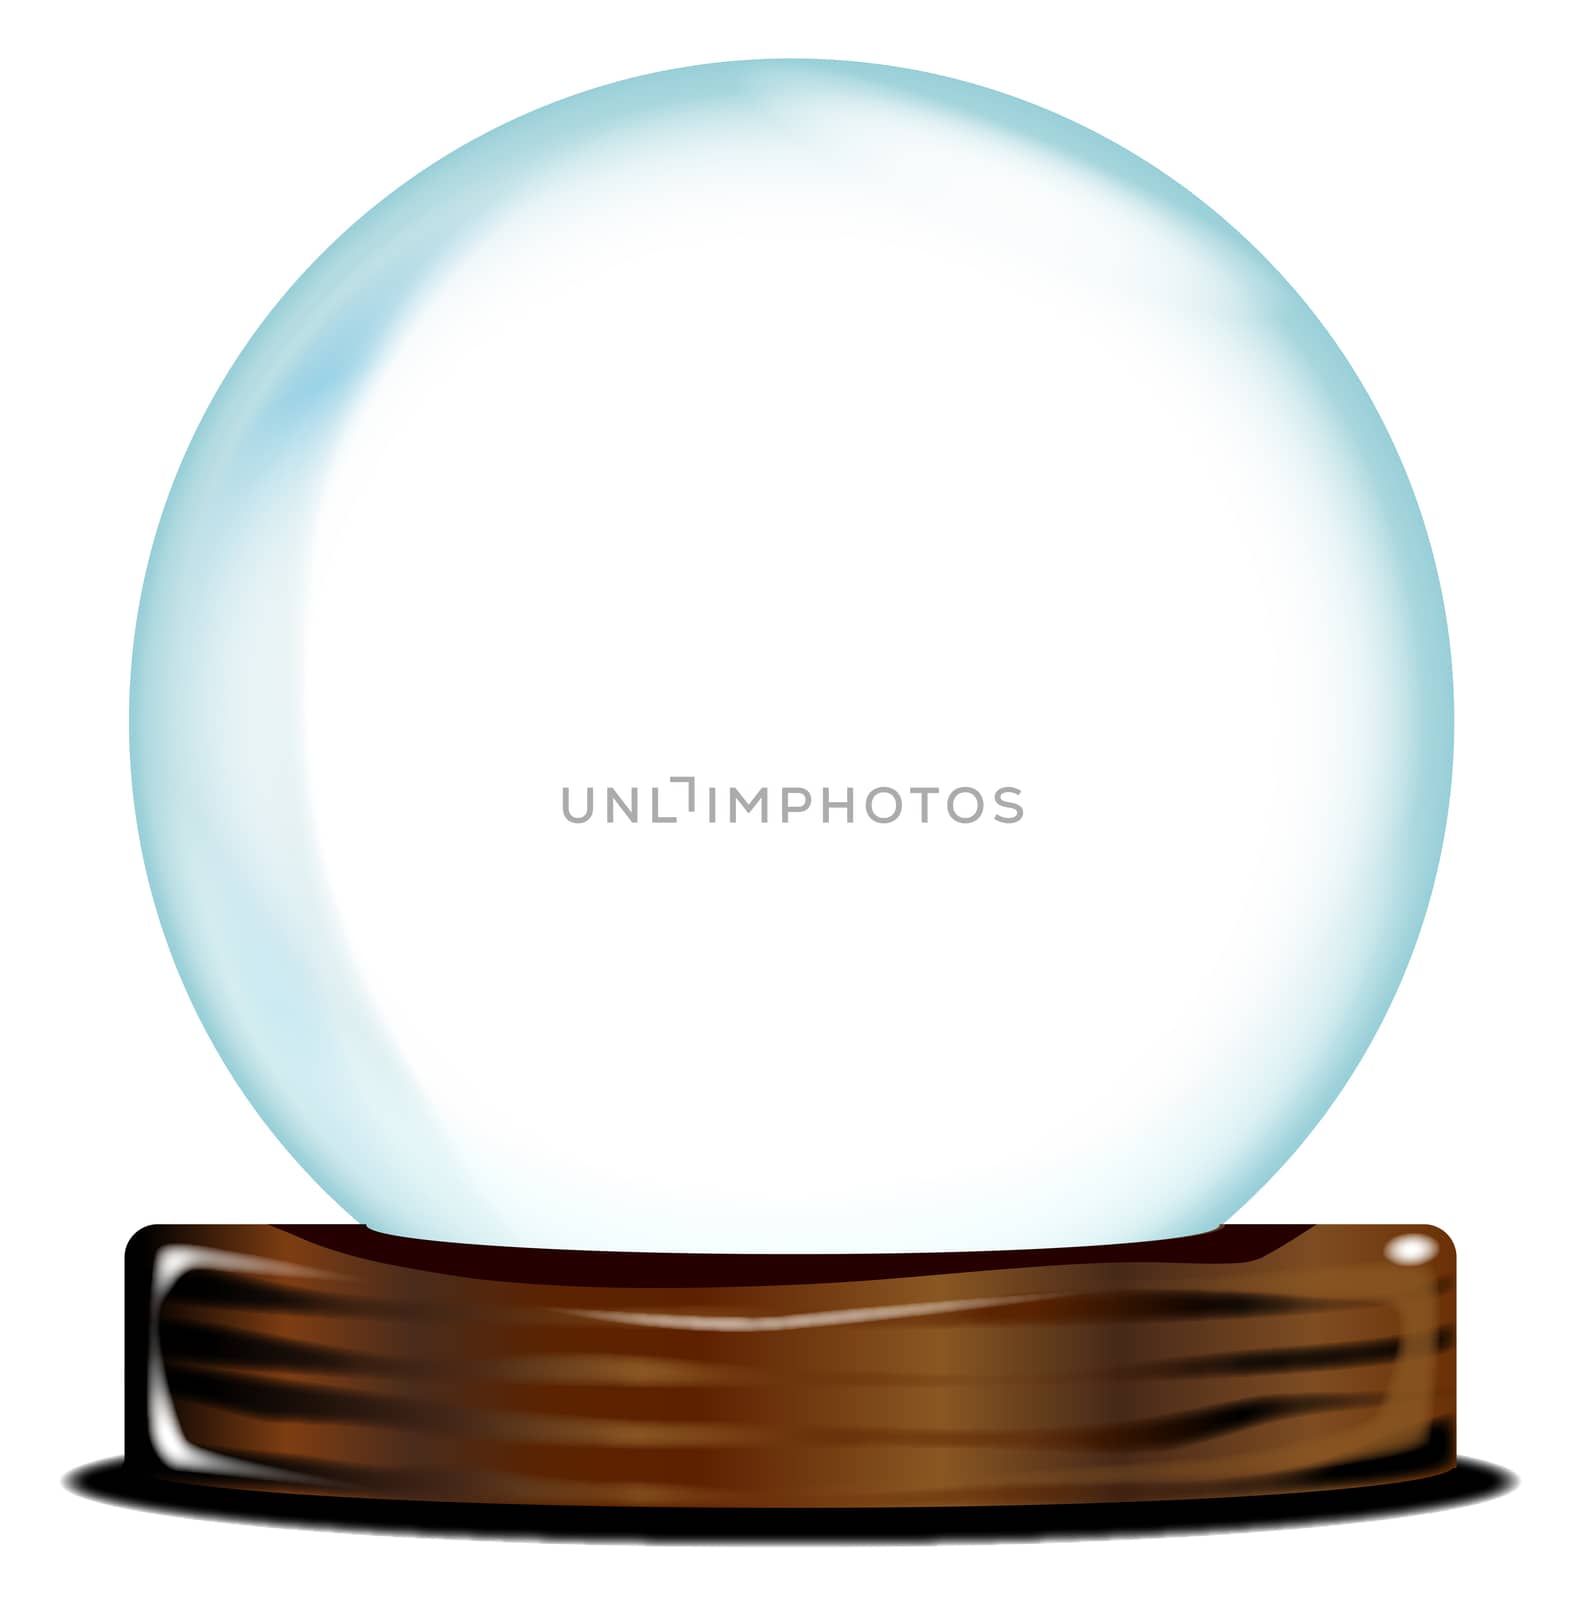 A blank crystal ball over over a white background